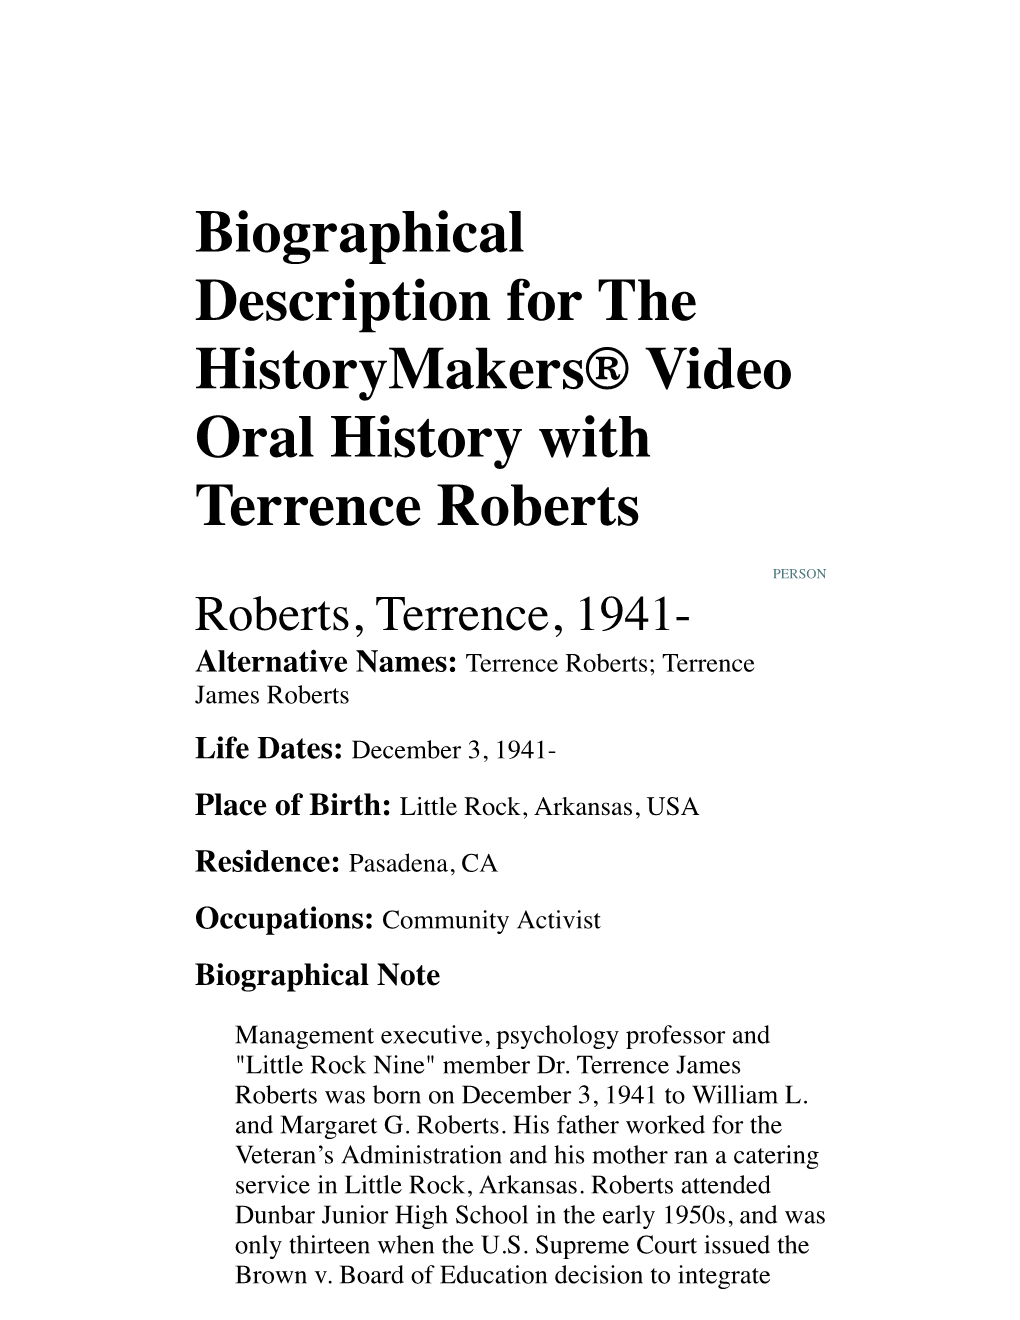 Biographical Description for the Historymakers® Video Oral History with Terrence Roberts